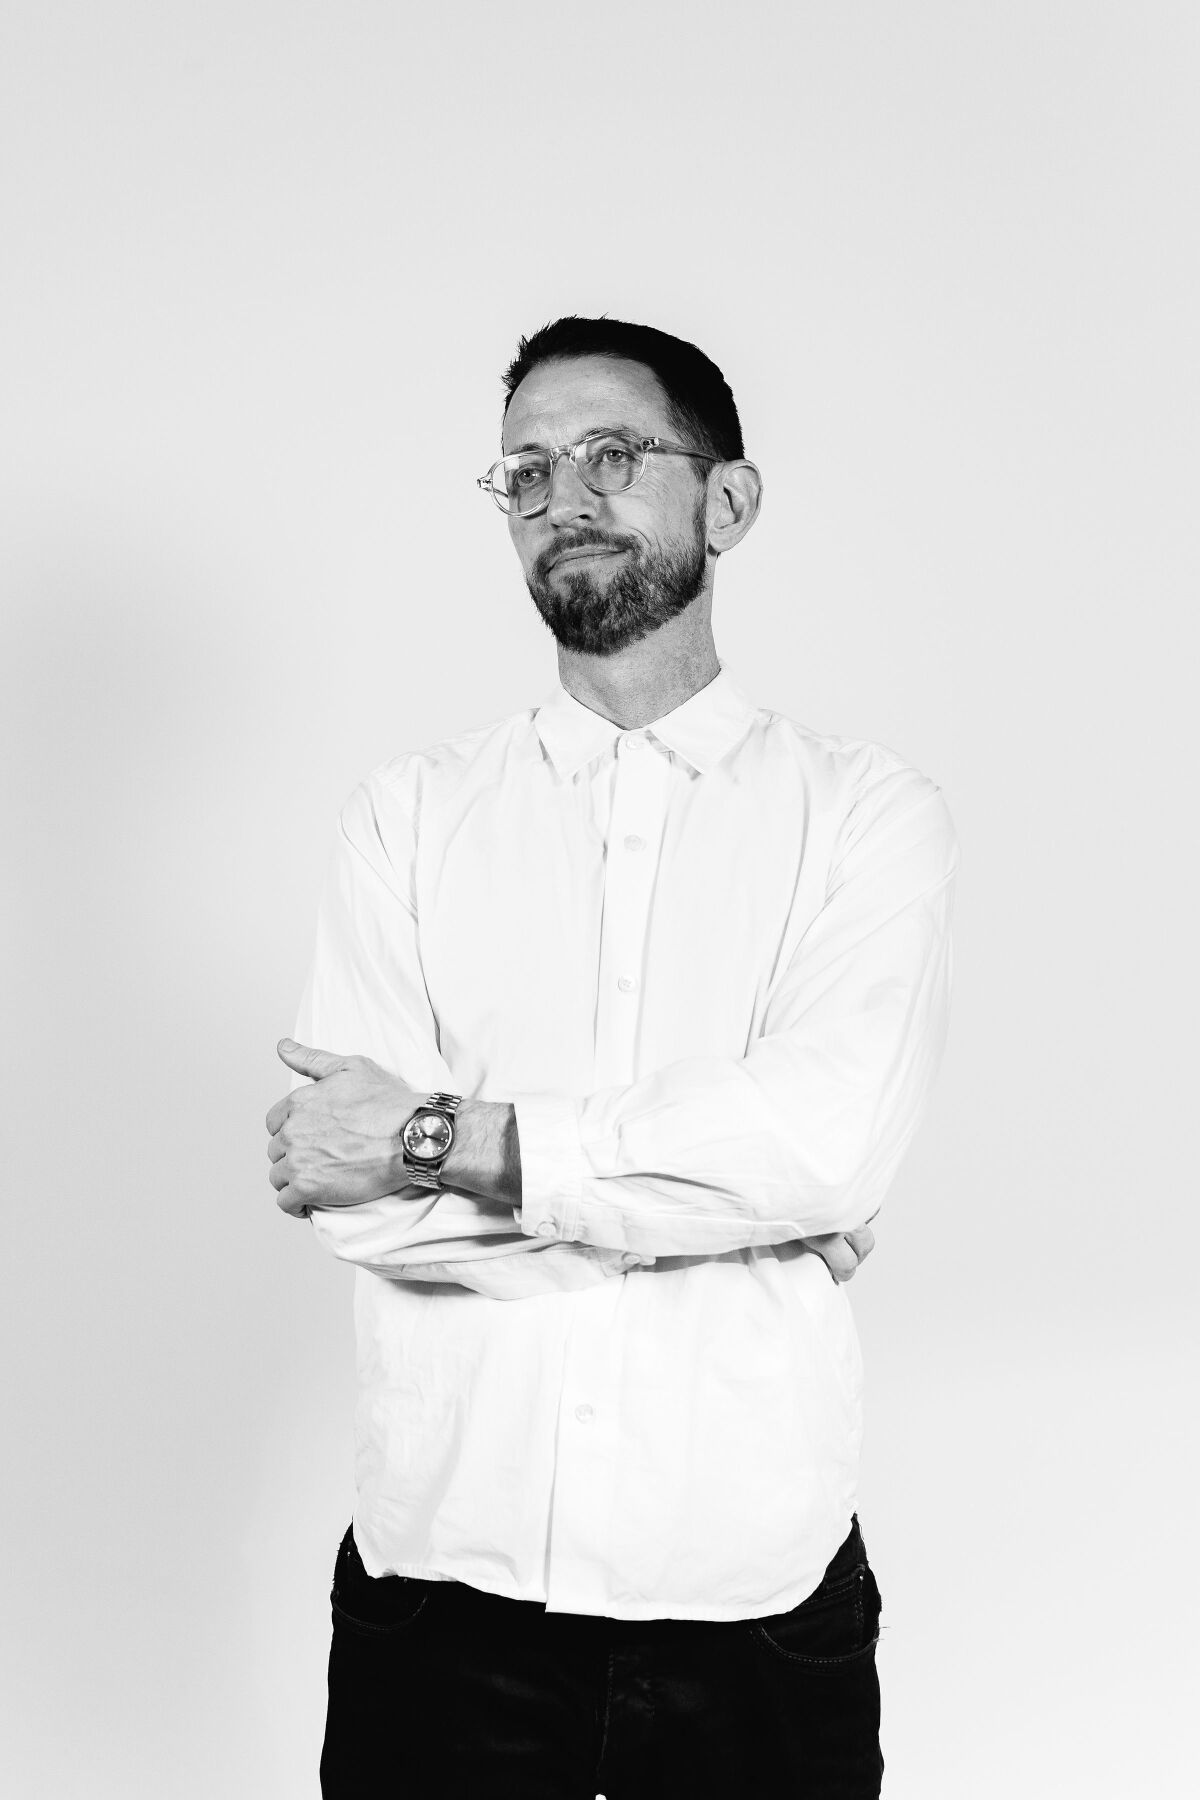 Bearded man in glasses and white collared shirt